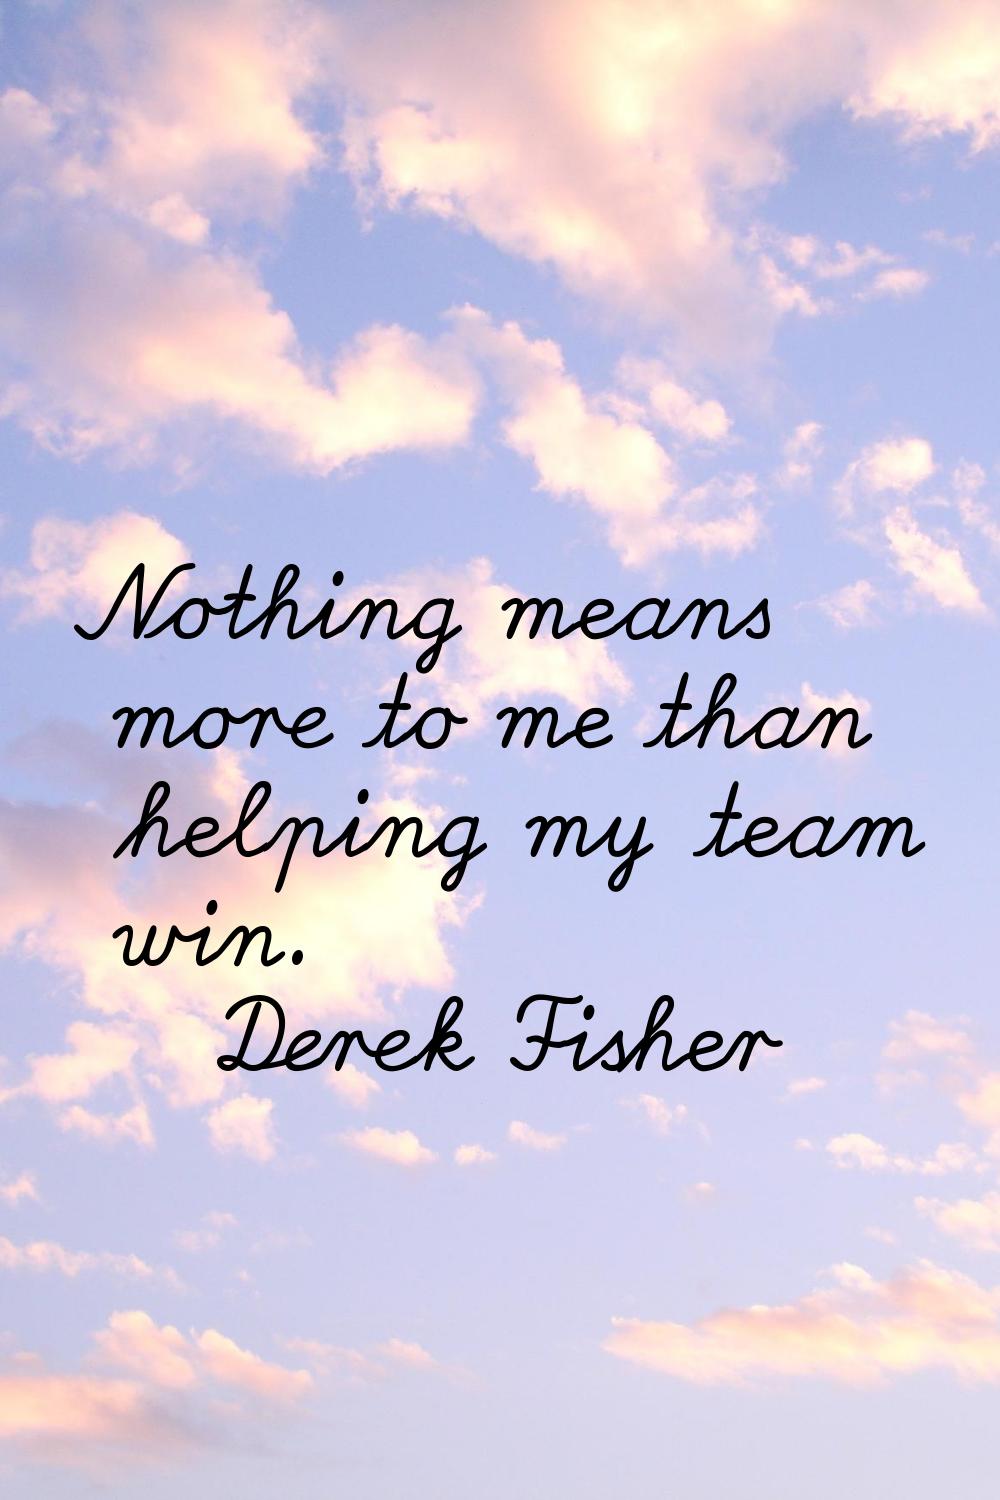 Nothing means more to me than helping my team win.